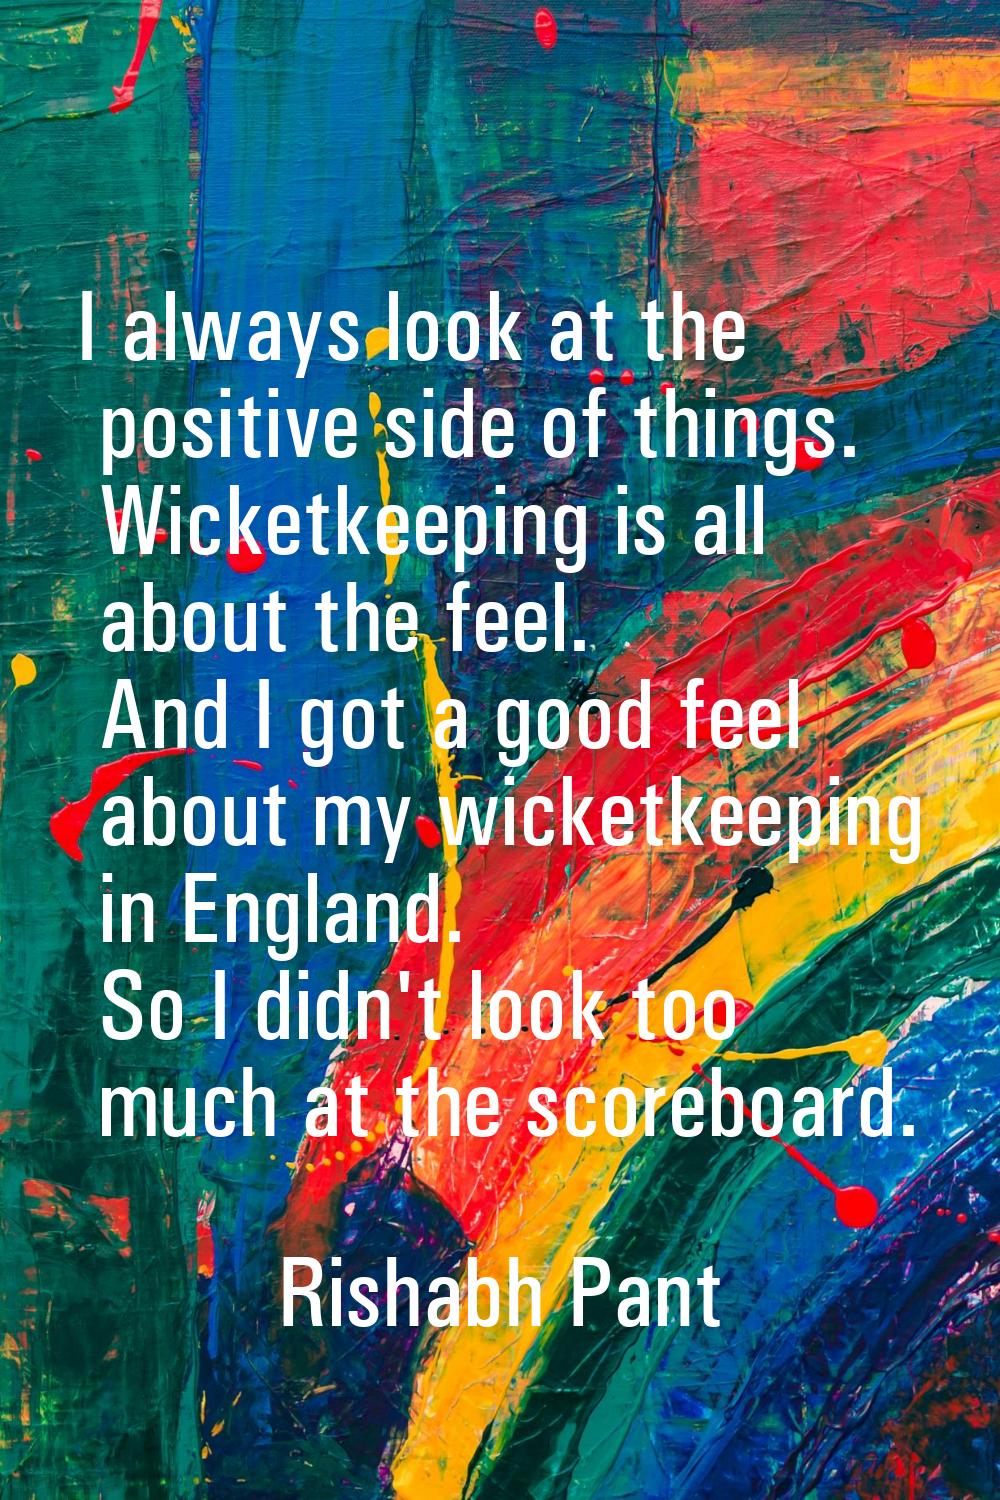 I always look at the positive side of things. Wicketkeeping is all about the feel. And I got a good